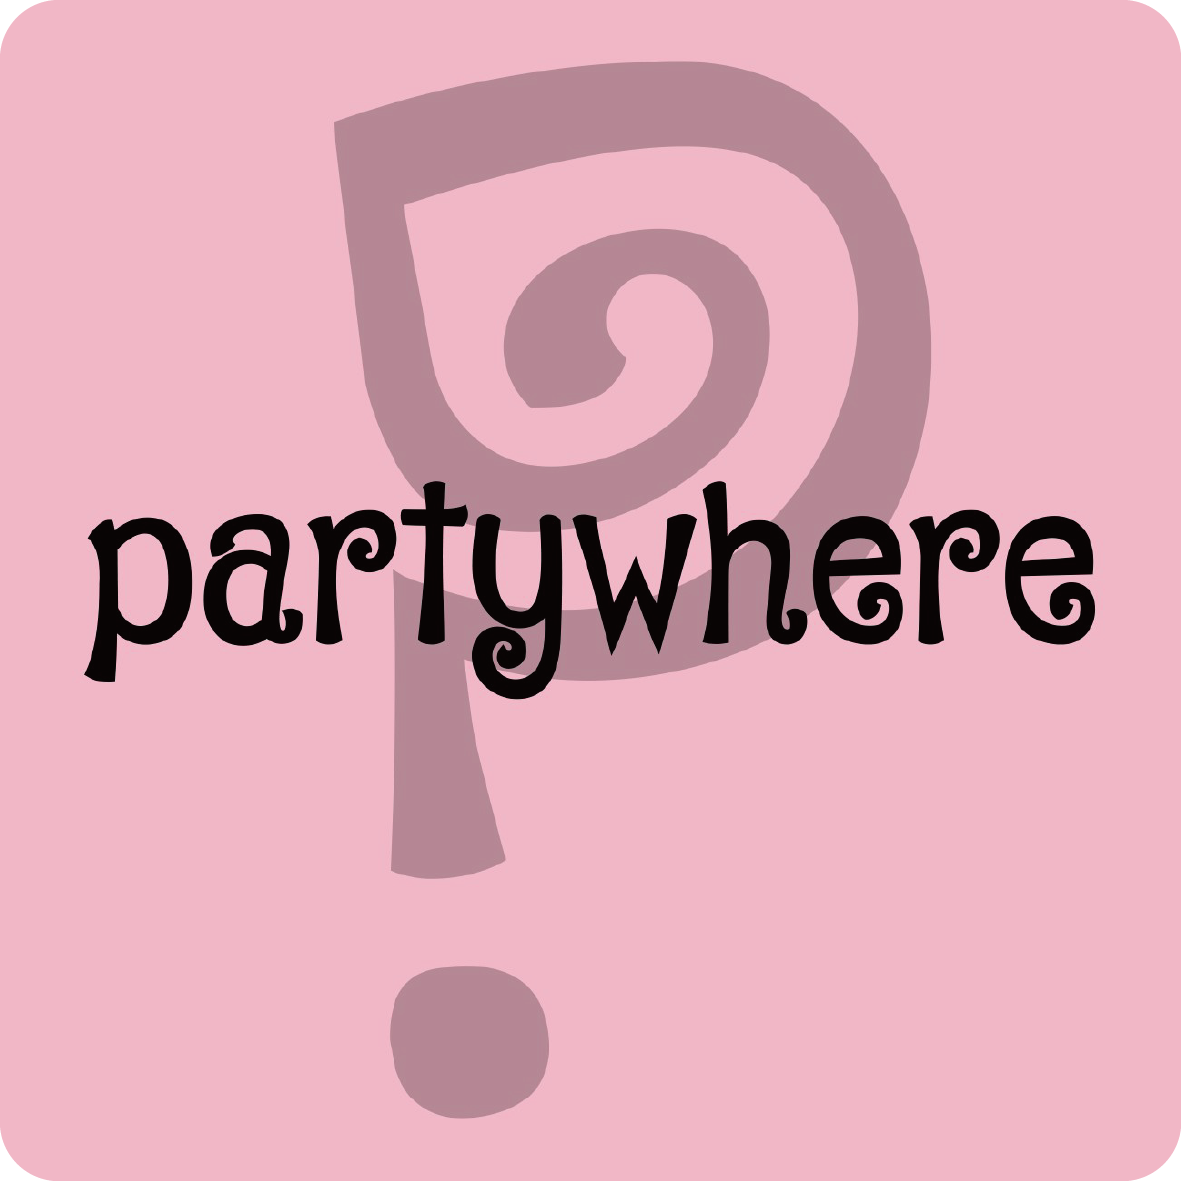 partywhere？